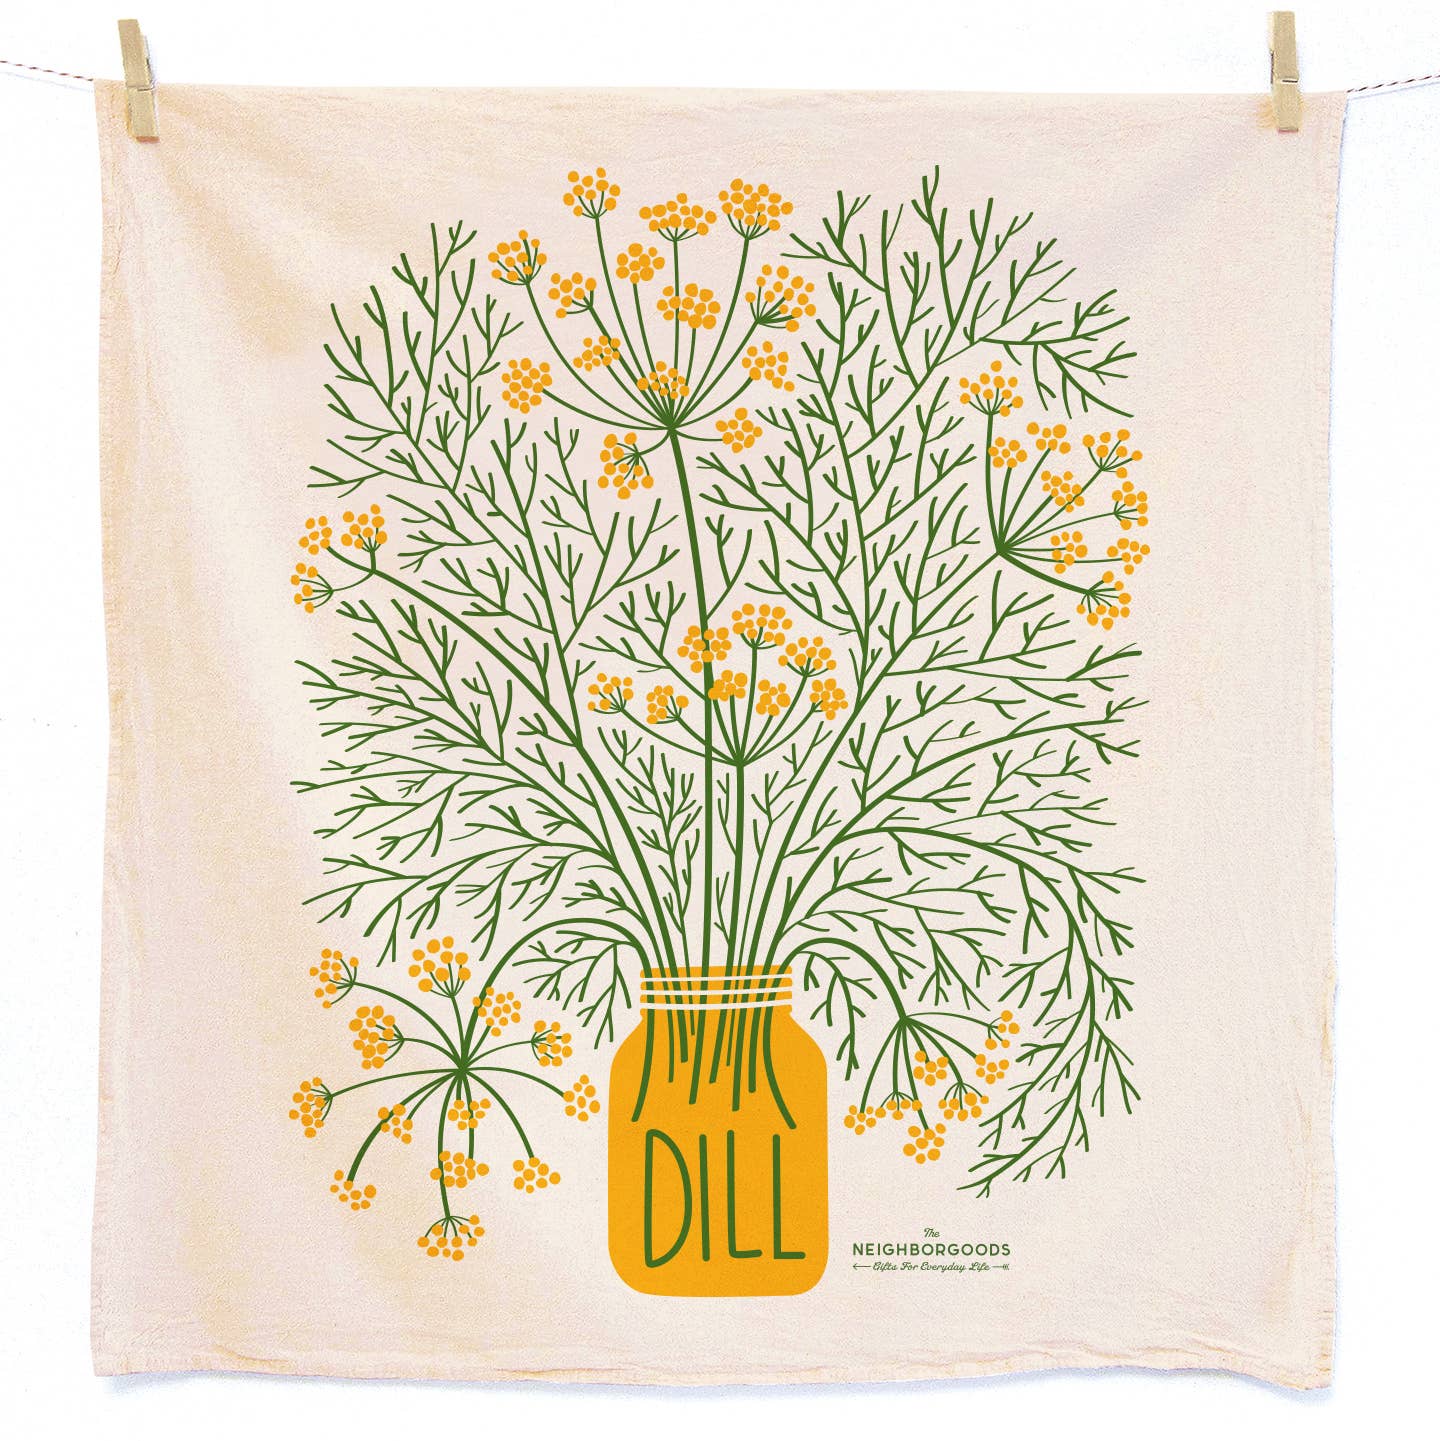 Dill plant dish towel by The Neighborgoods 